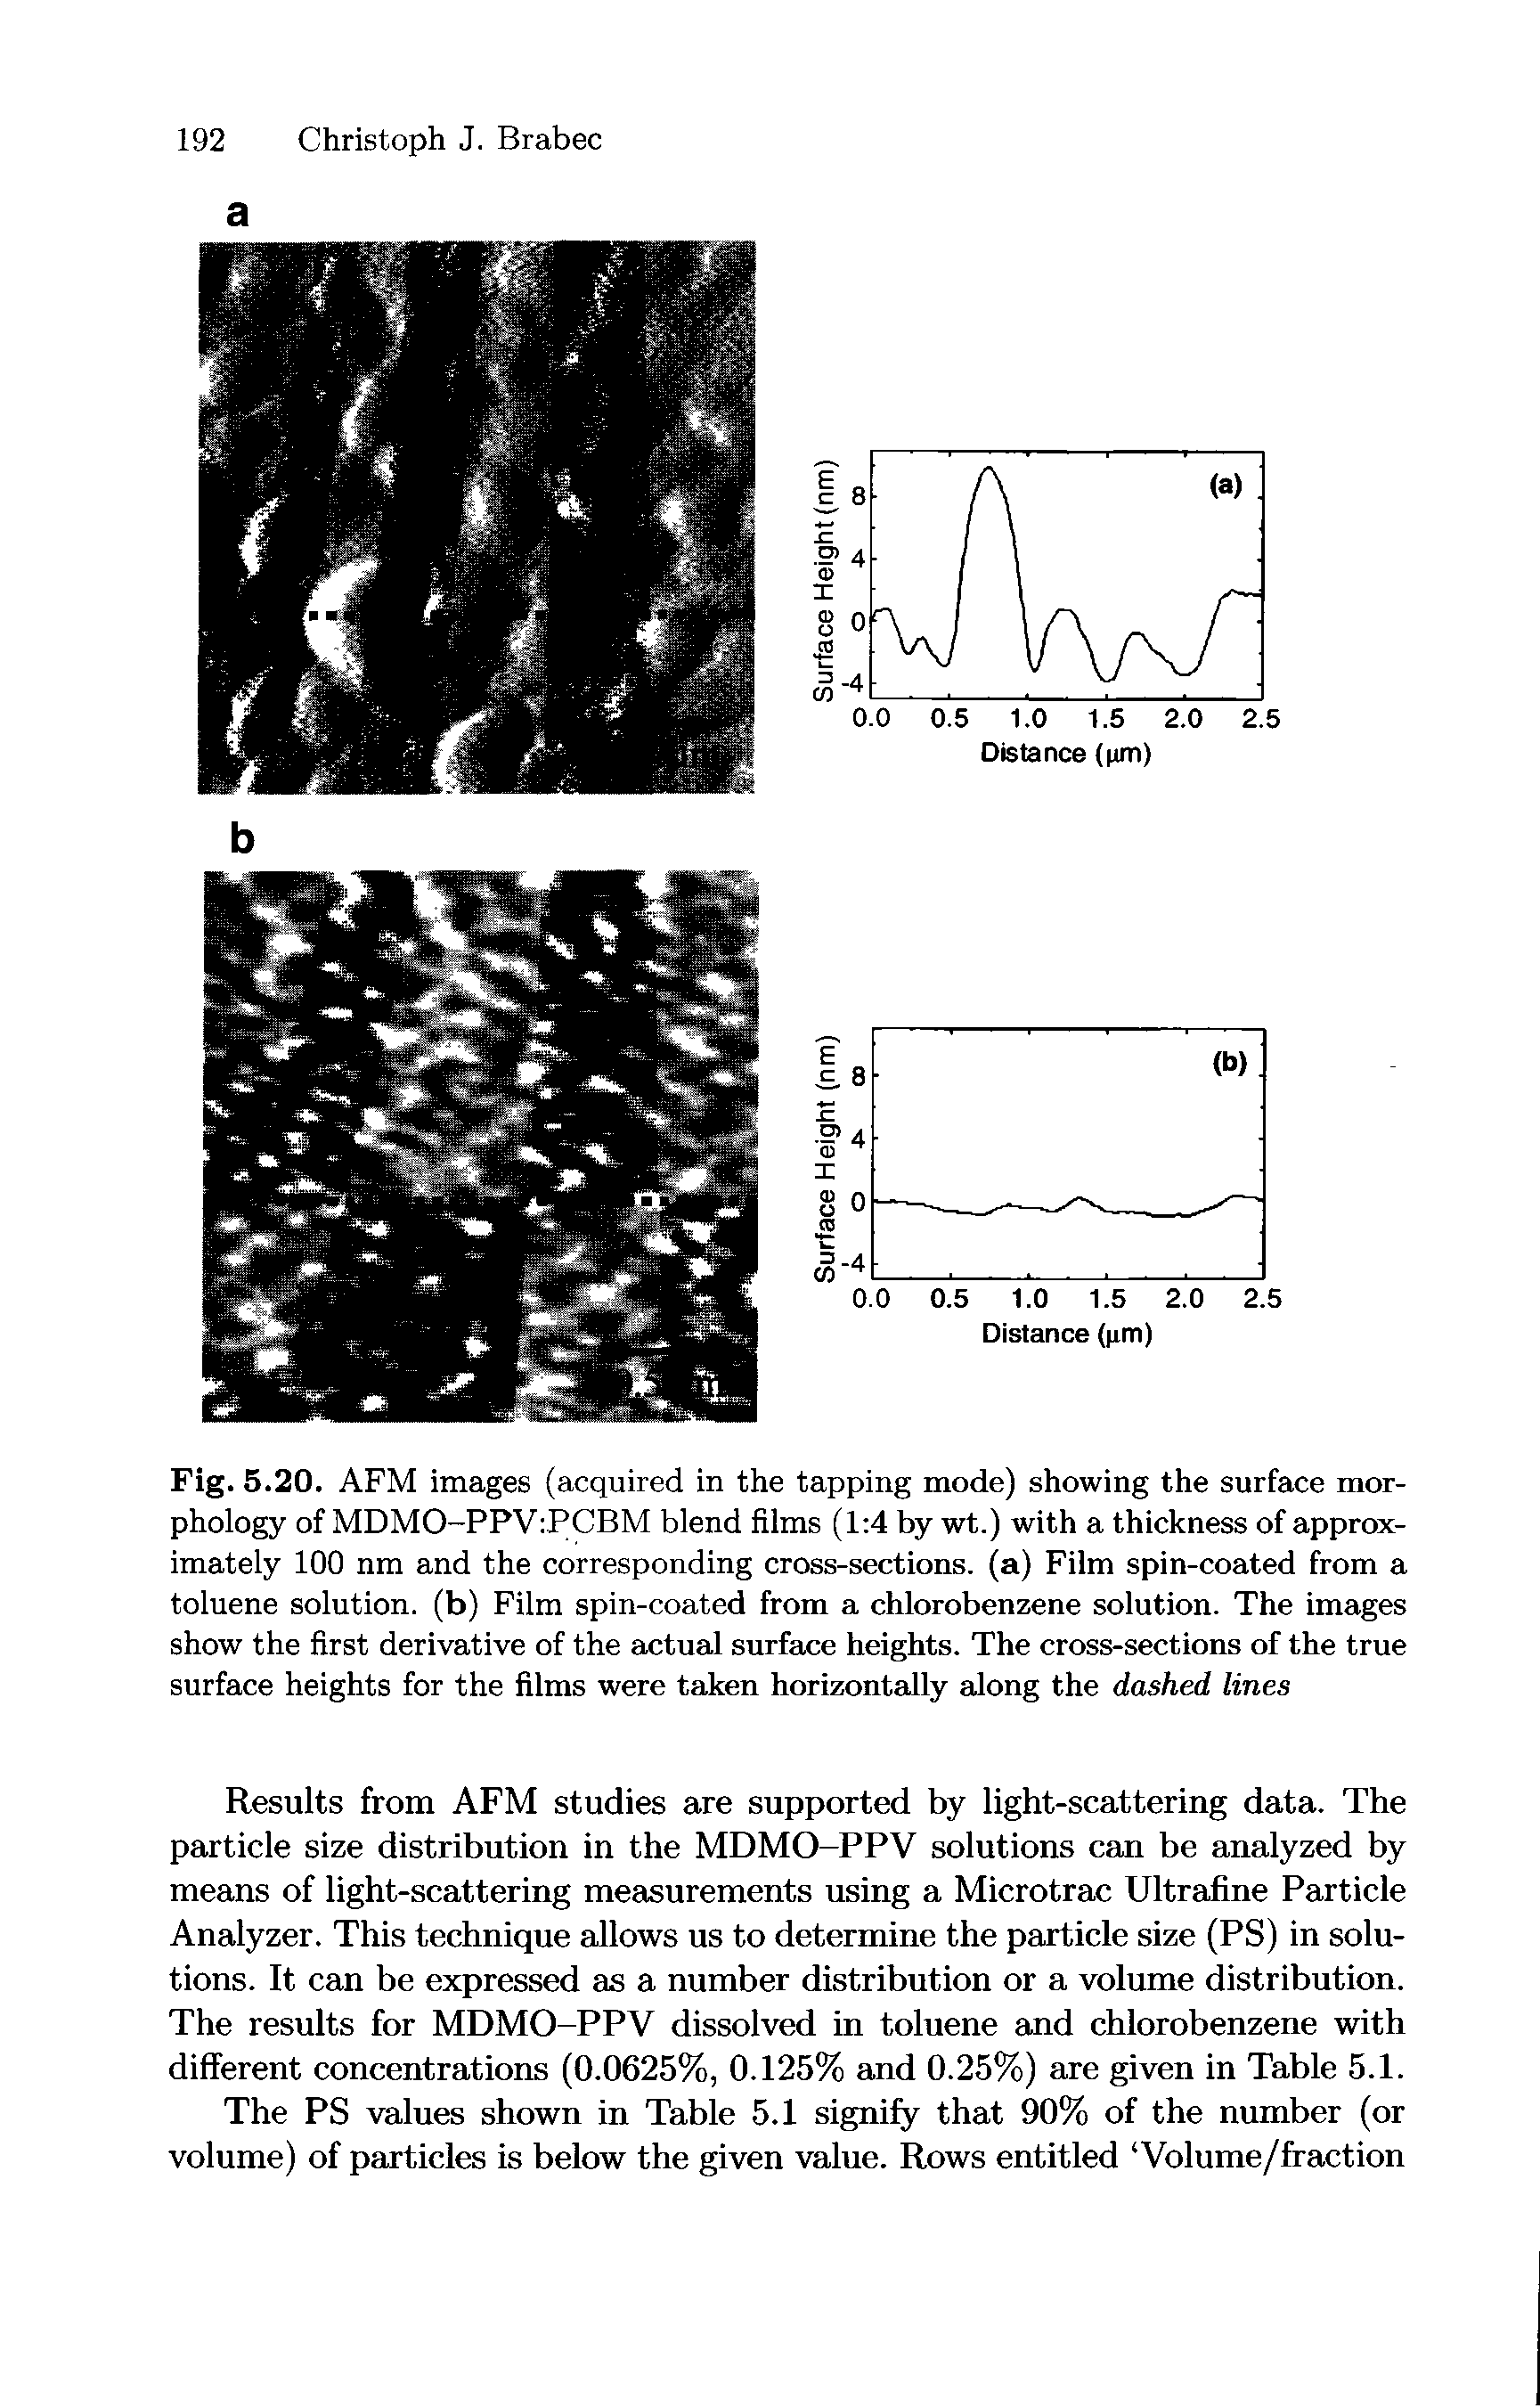 Fig. 5.20. AFM images (acquired in the tapping mode) showing the surface morphology of MDMO-PPV PCBM blend films (1 4 by wt.) with a thickness of approximately 100 nm and the corresponding cross-sections, (a) Film spin-coated from a toluene solution, (b) Film spin-coated from a chlorobenzene solution. The images show the first derivative of the actual surface heights. The cross-sections of the true surface heights for the films were taken horizontally along the dashed lines...